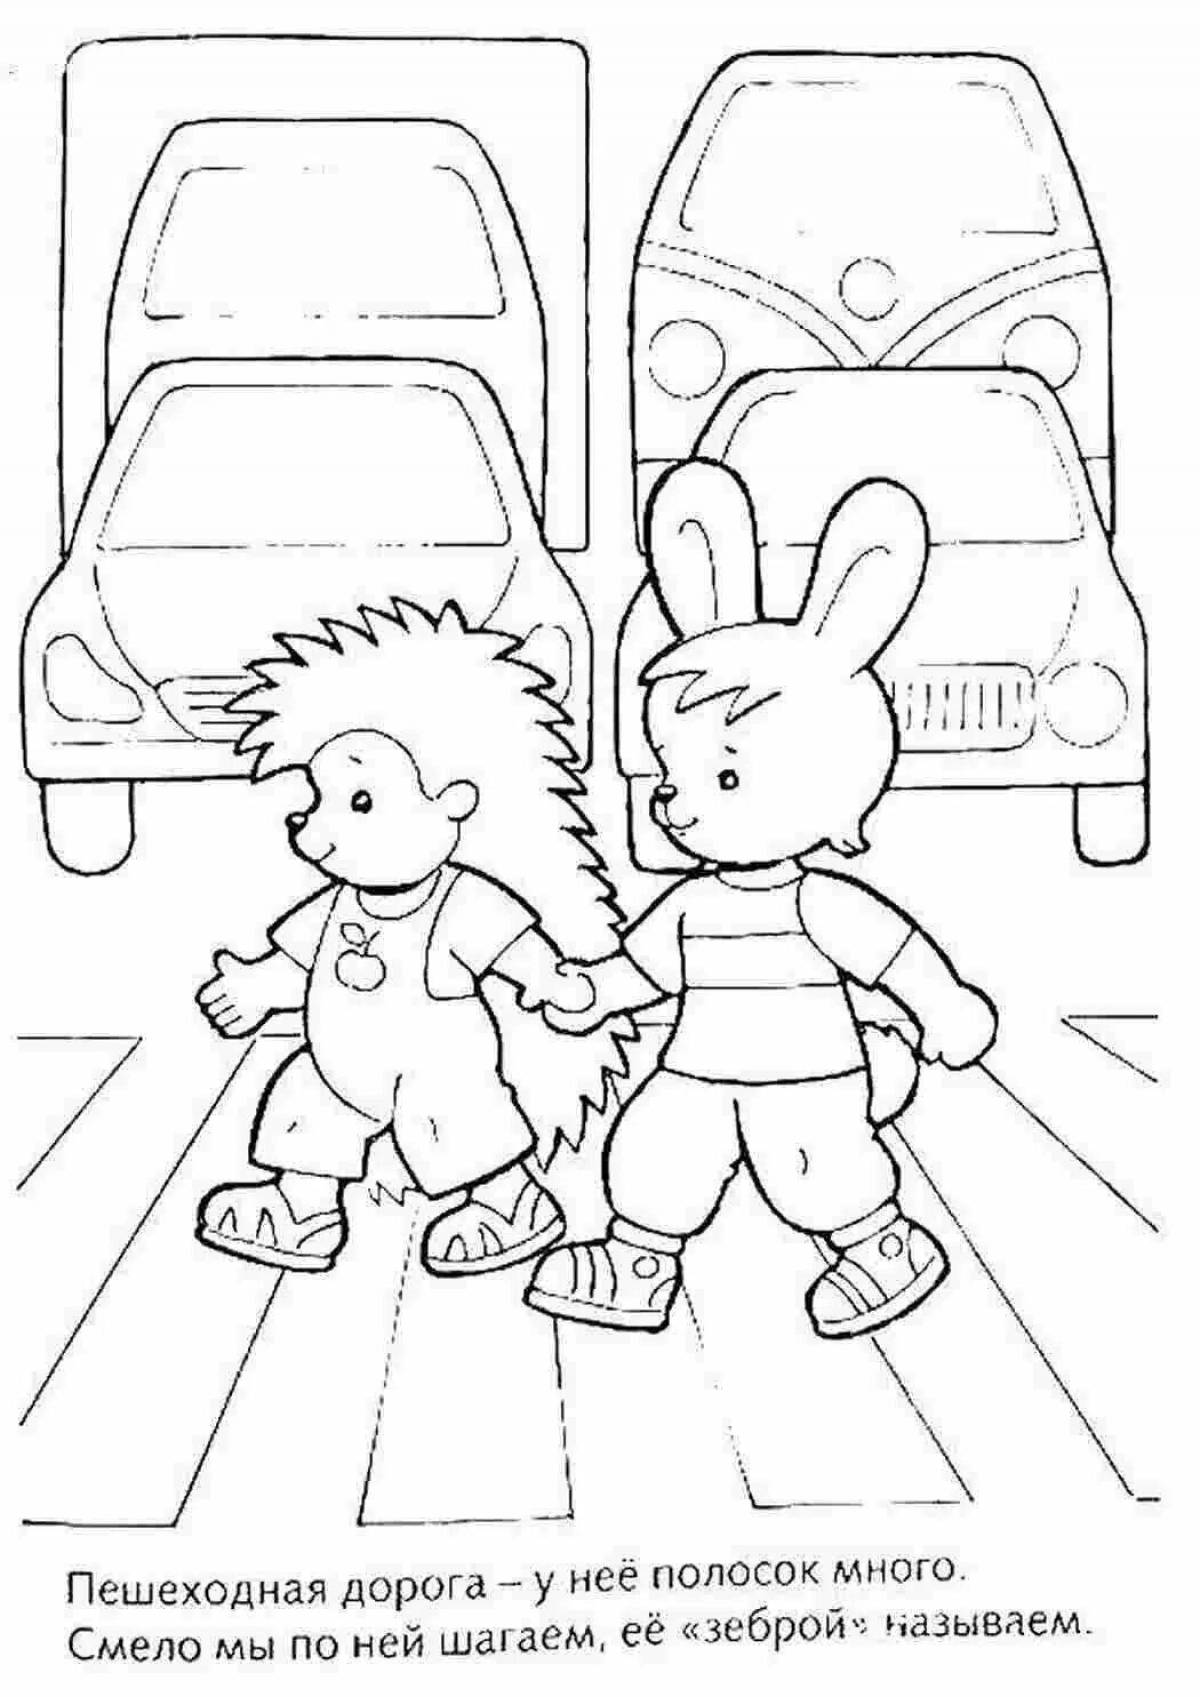 Traffic Safety Coloring Page